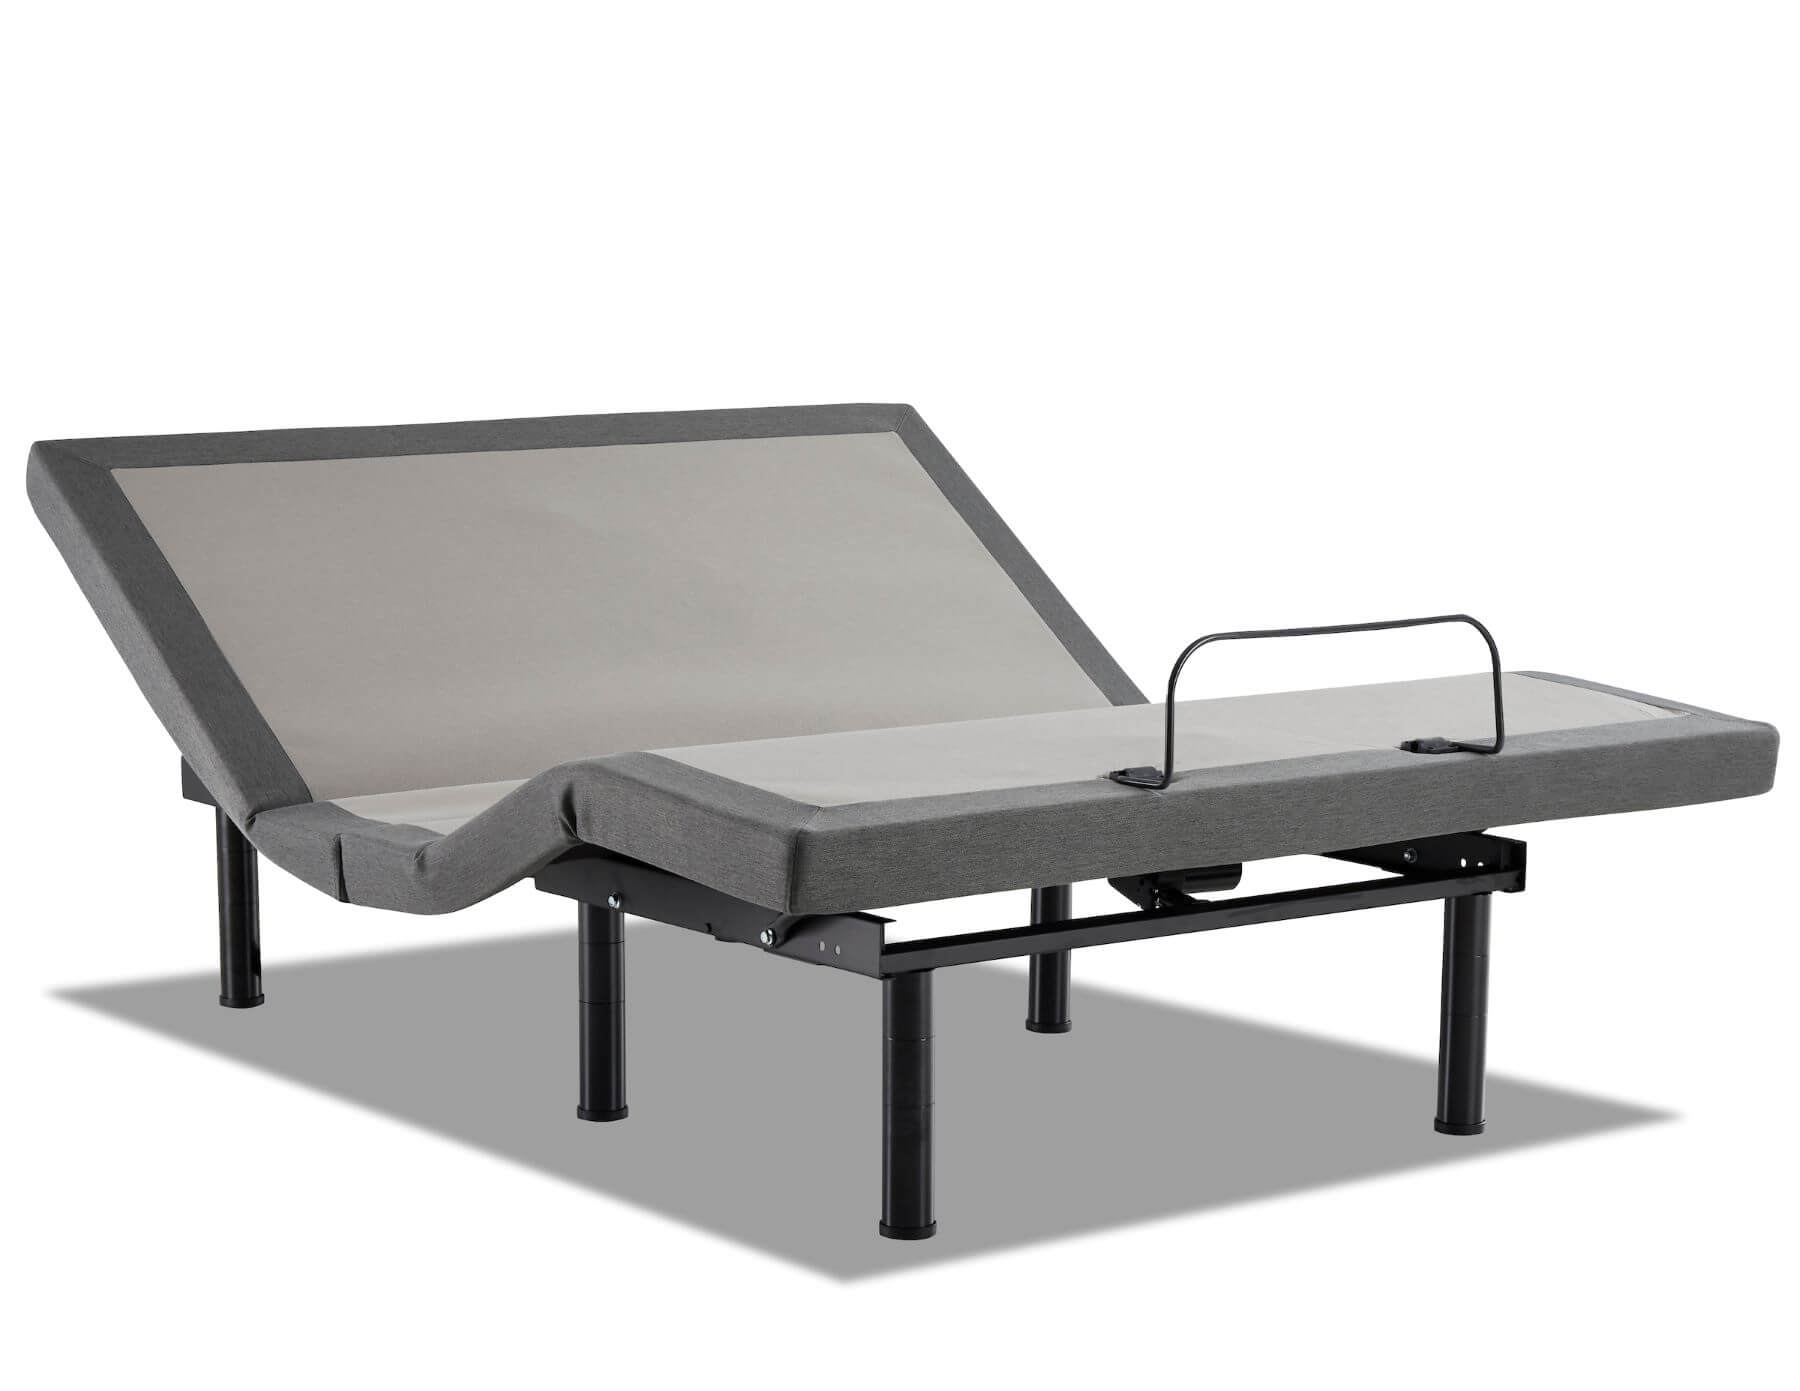 Lifestyle 3500 Adjustable Bed Base, How To Use Adjustable Base With Bed Frame